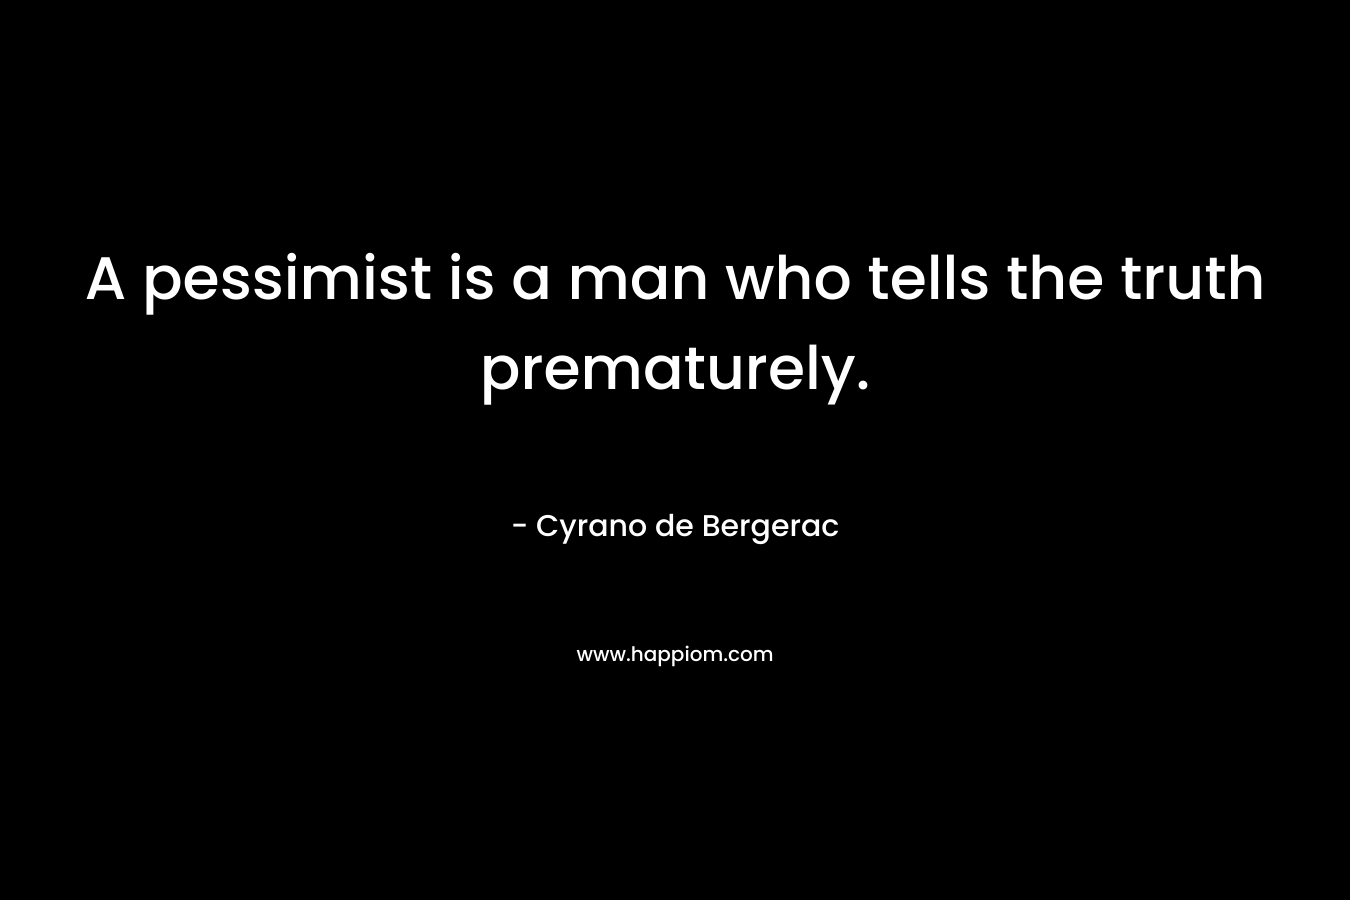 A pessimist is a man who tells the truth prematurely. – Cyrano de Bergerac